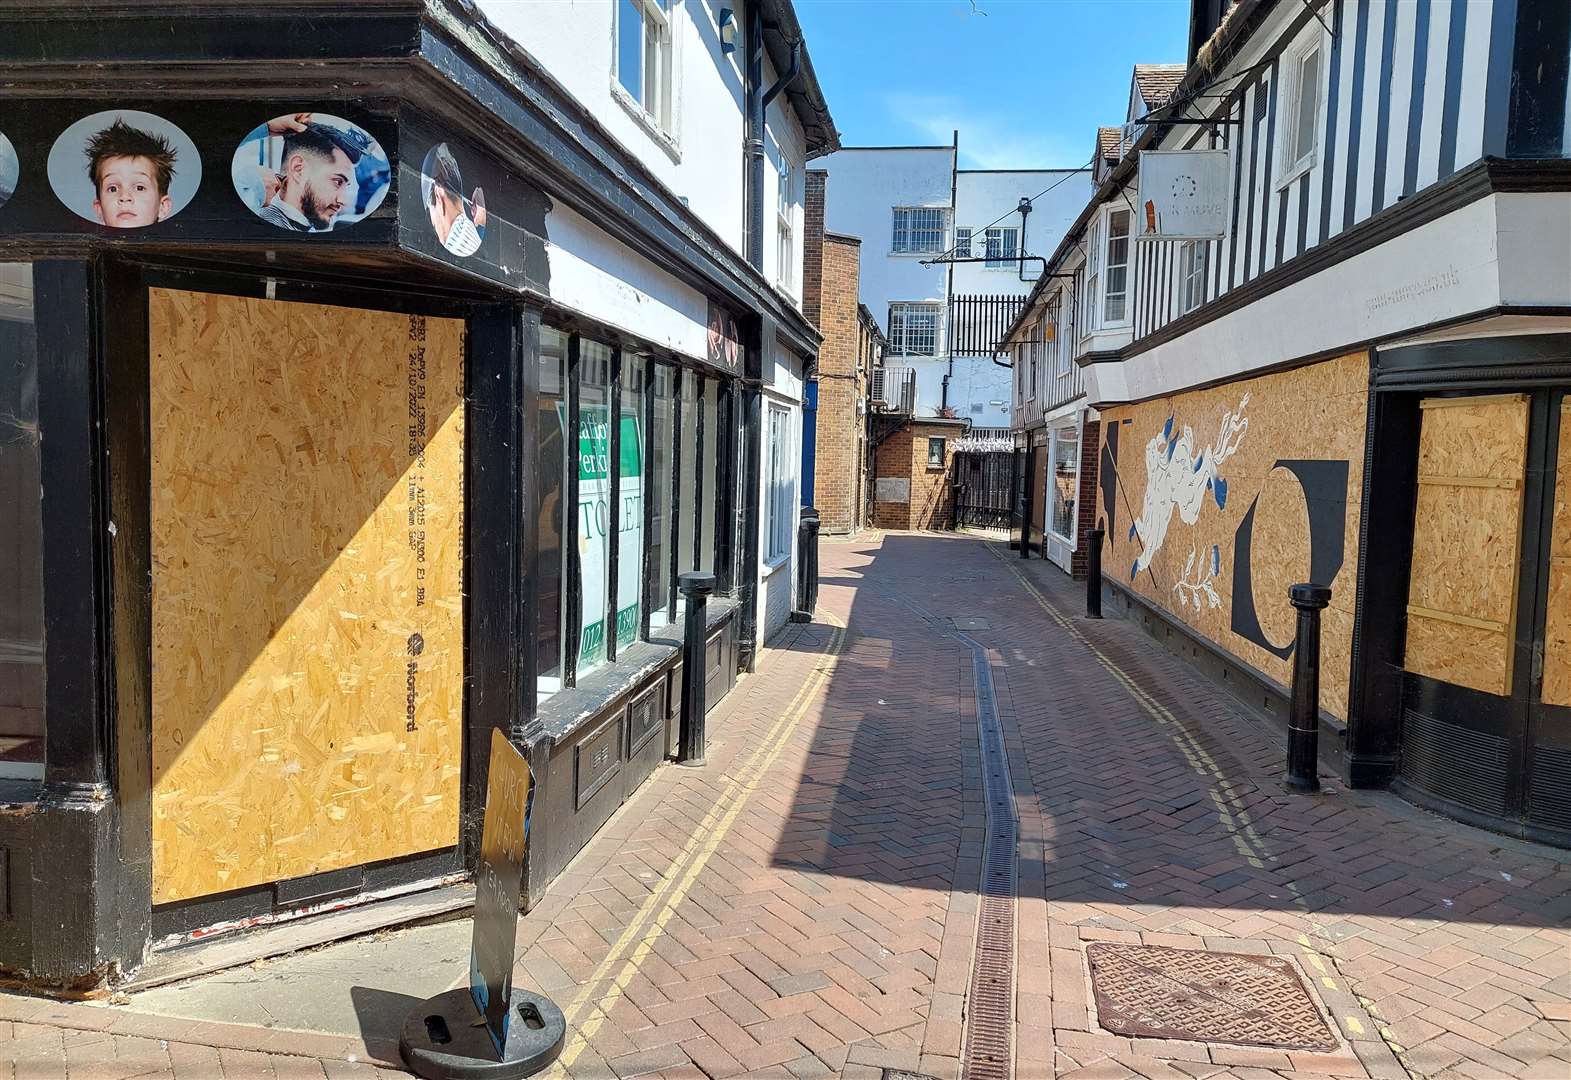 Boarded up shops in the streets surrounding the Tucked Away take away in Ashford